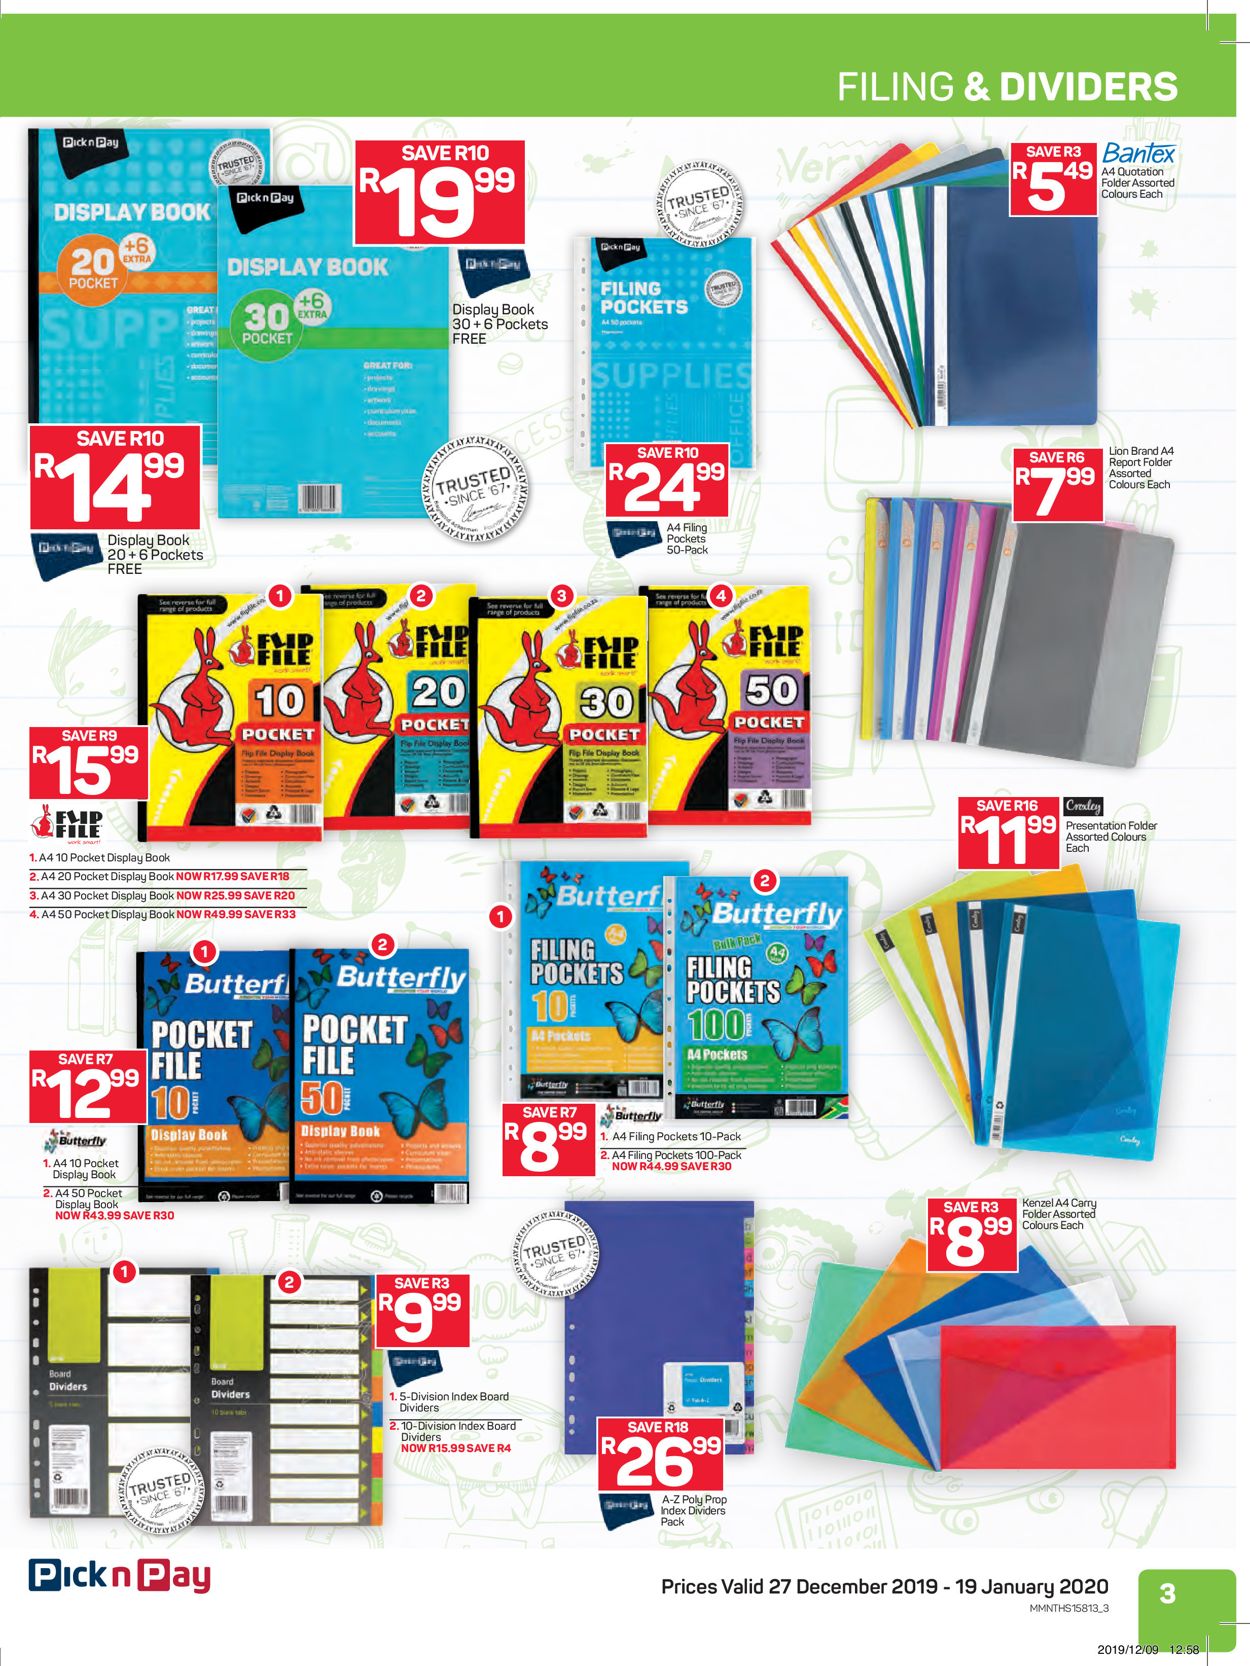 Pick n Pay Back 2 School Catalogue - 2019/12/27-2020/01/19 (Page 4)